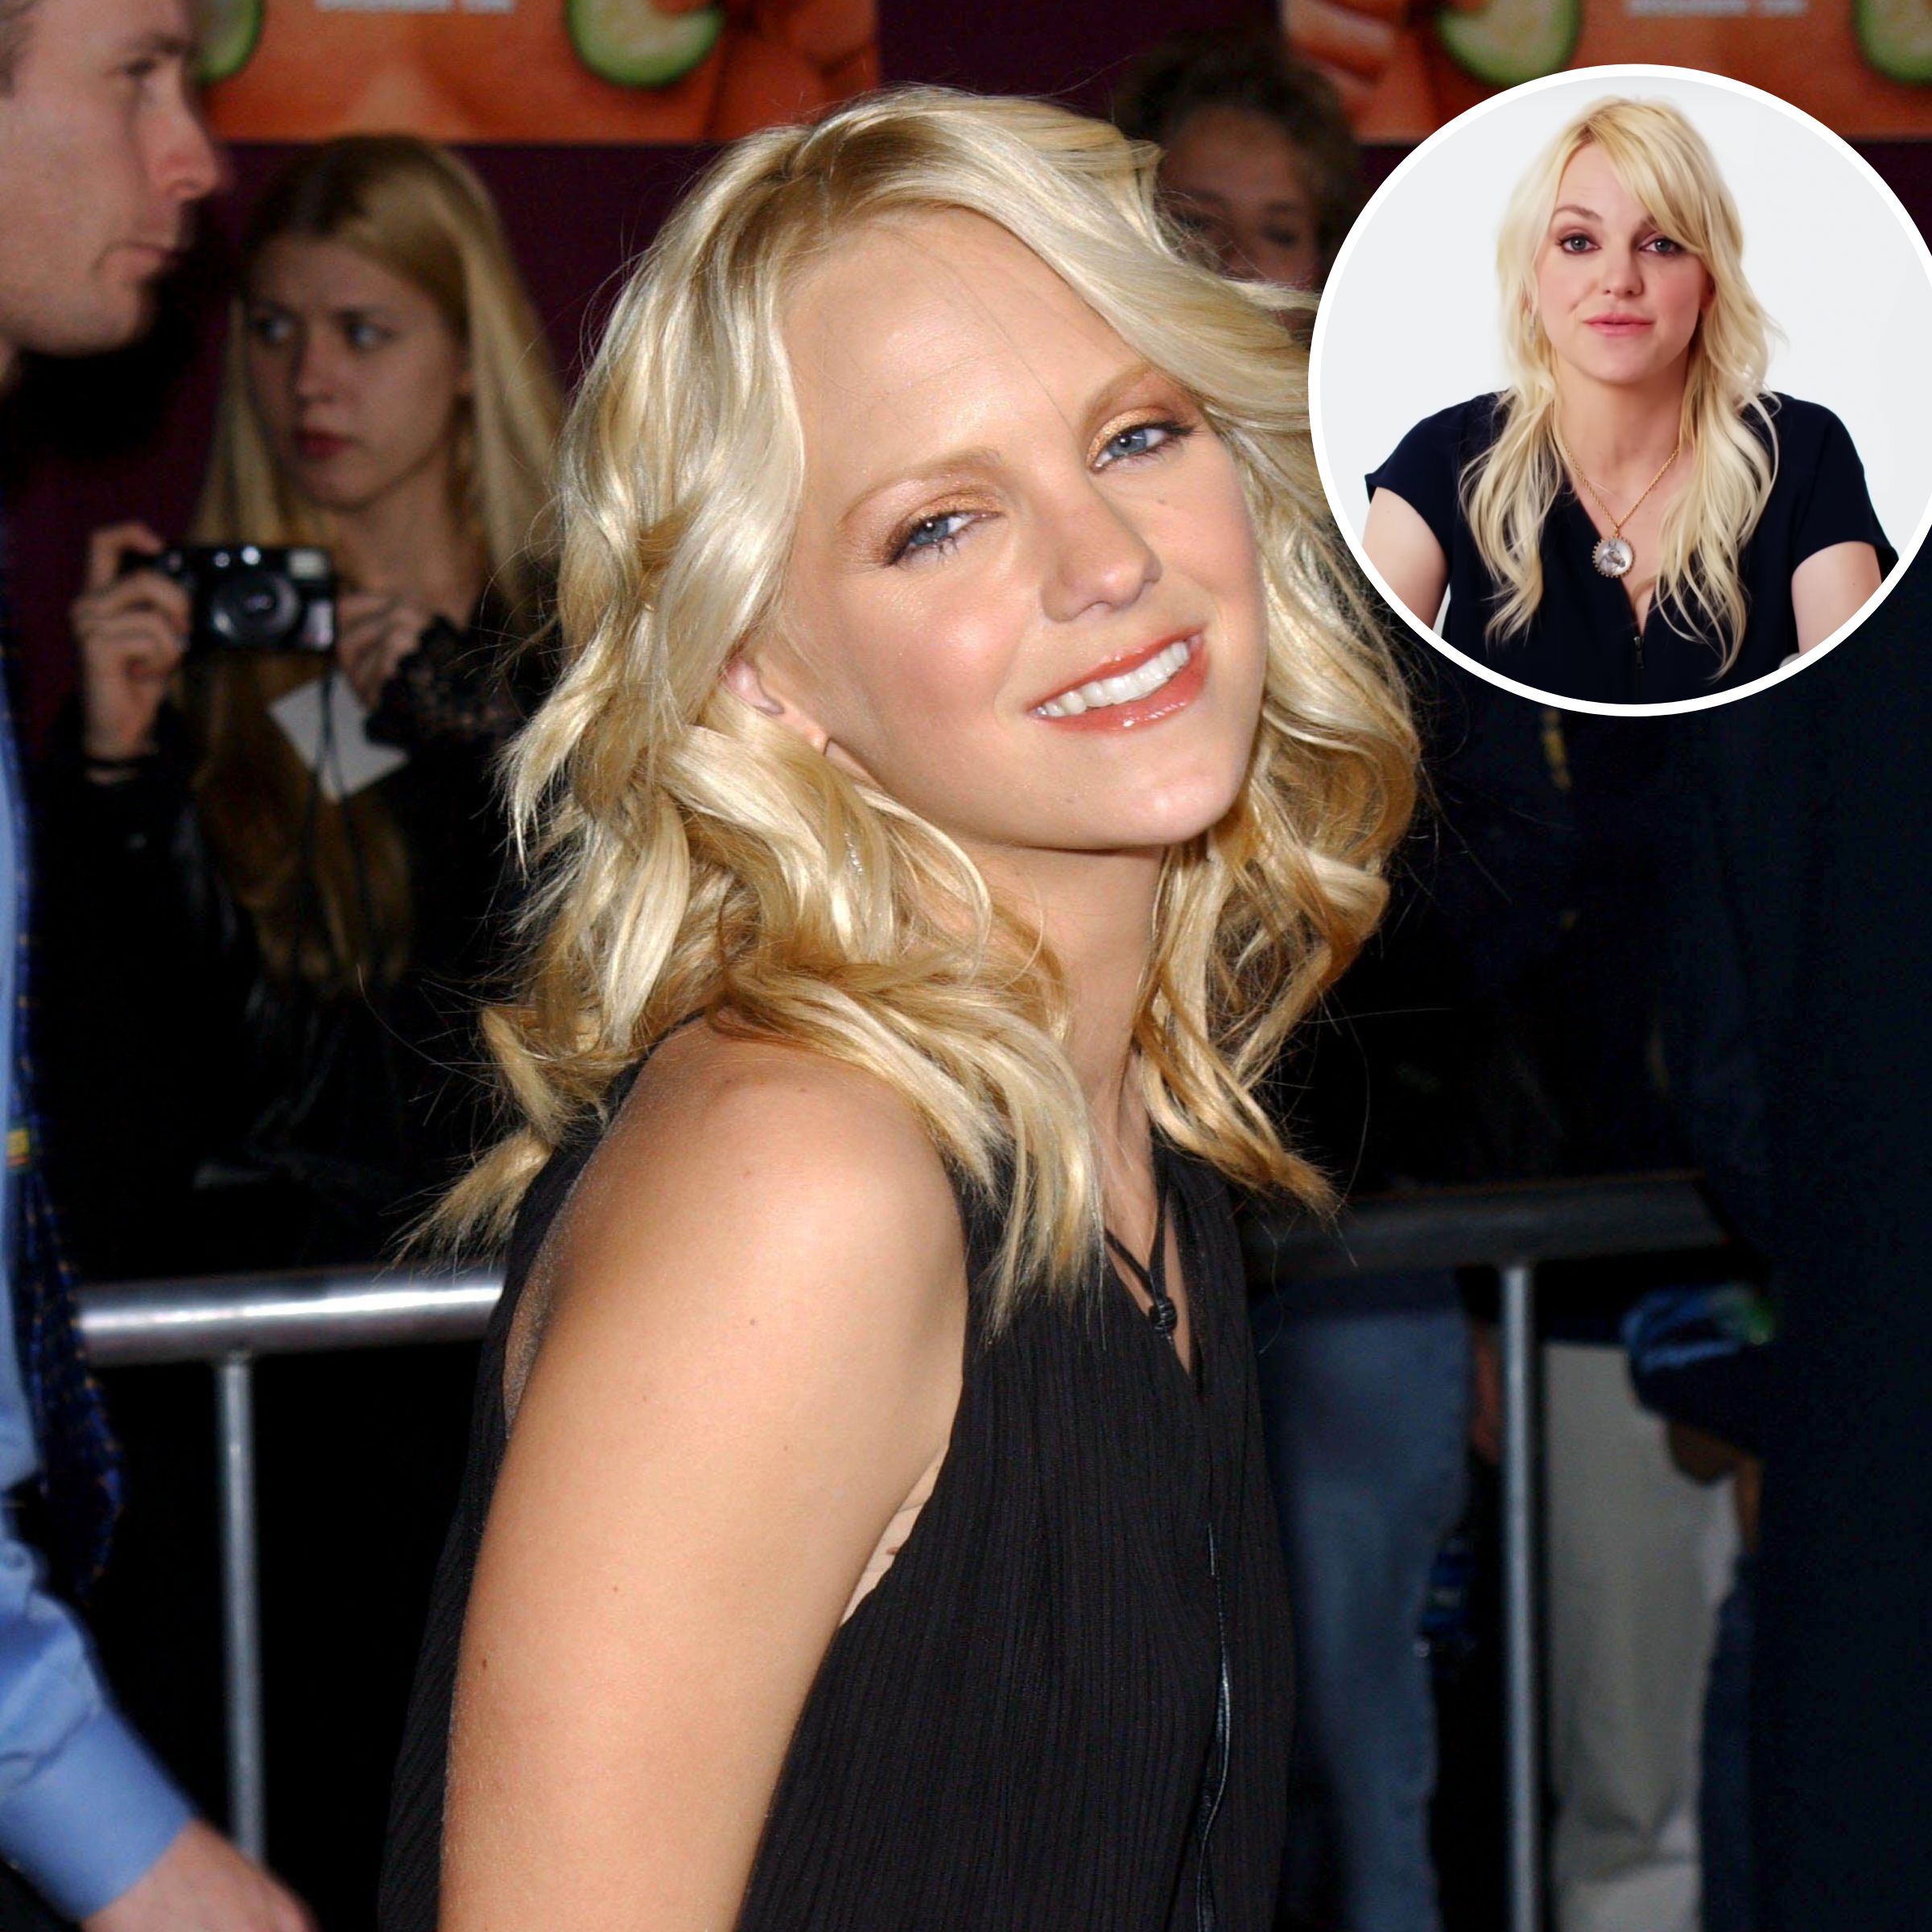 Anna Faris Plastic Surgery: Her Transformation Over the Years